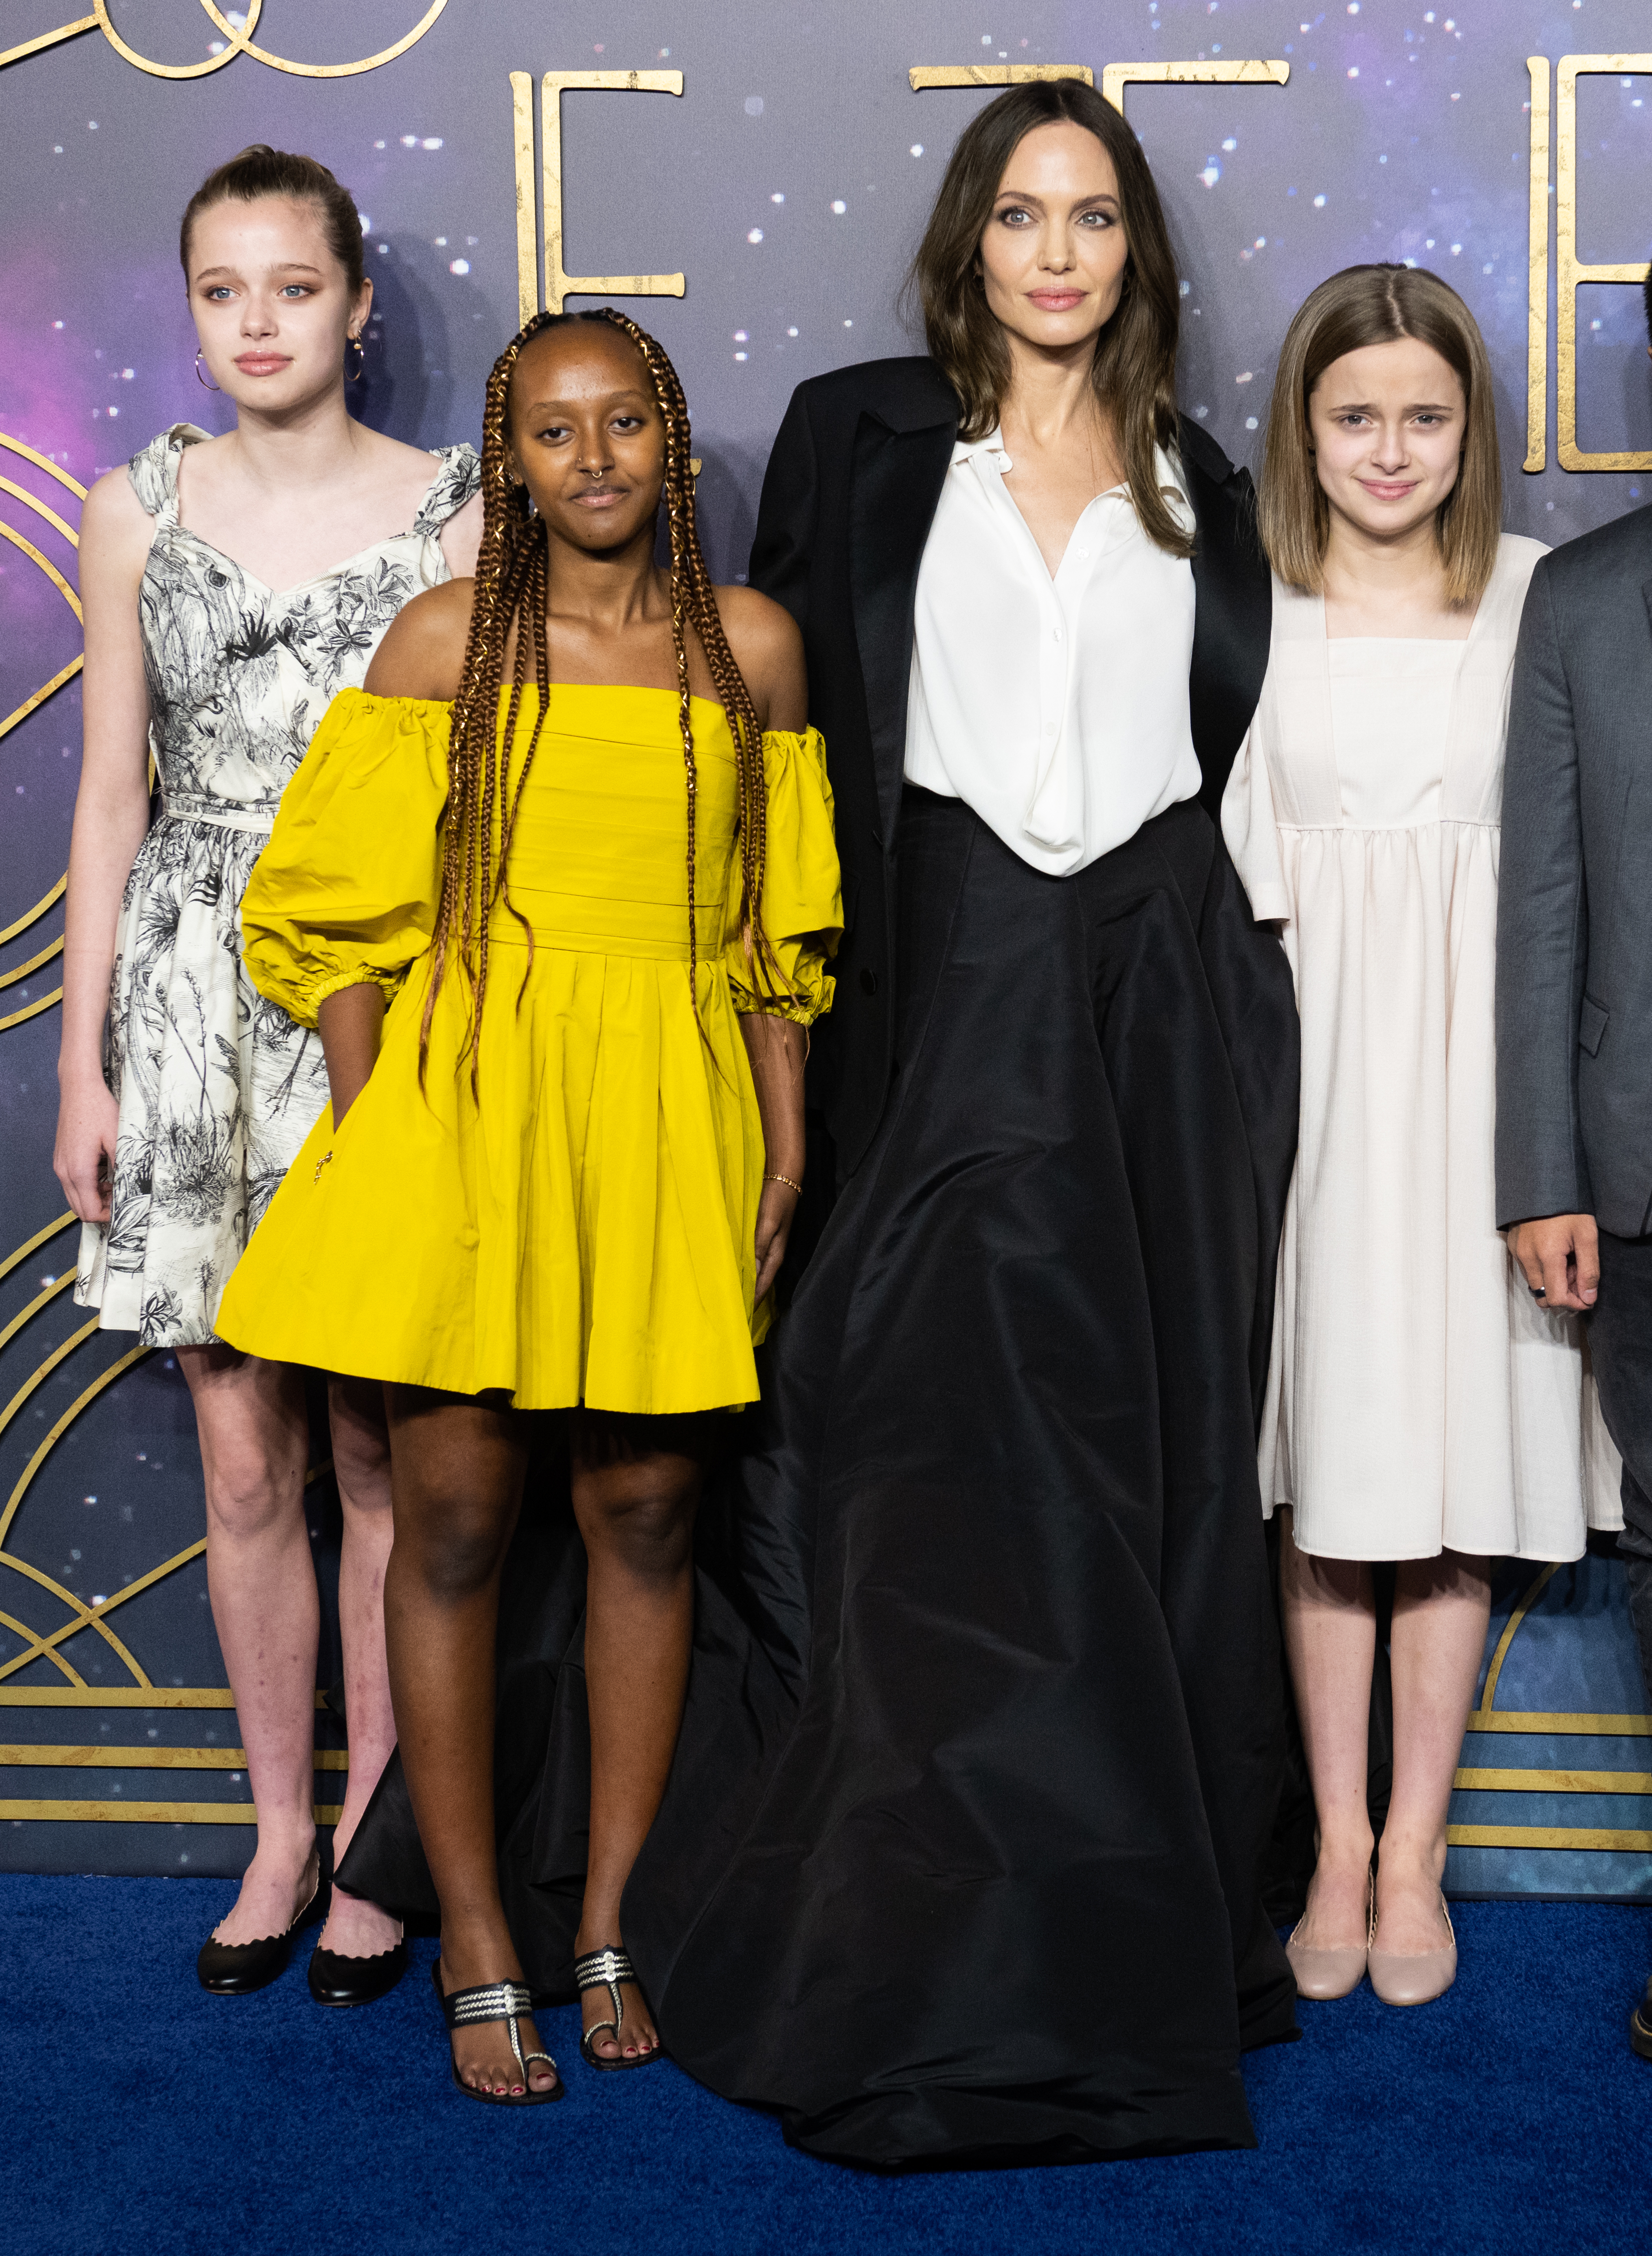 Angelina Jolie with Shiloh, Zahara, and Vivienne Jolie-Pitt at BFI IMAX Waterloo in London, England on October 27, 2021 | Source: Getty Images